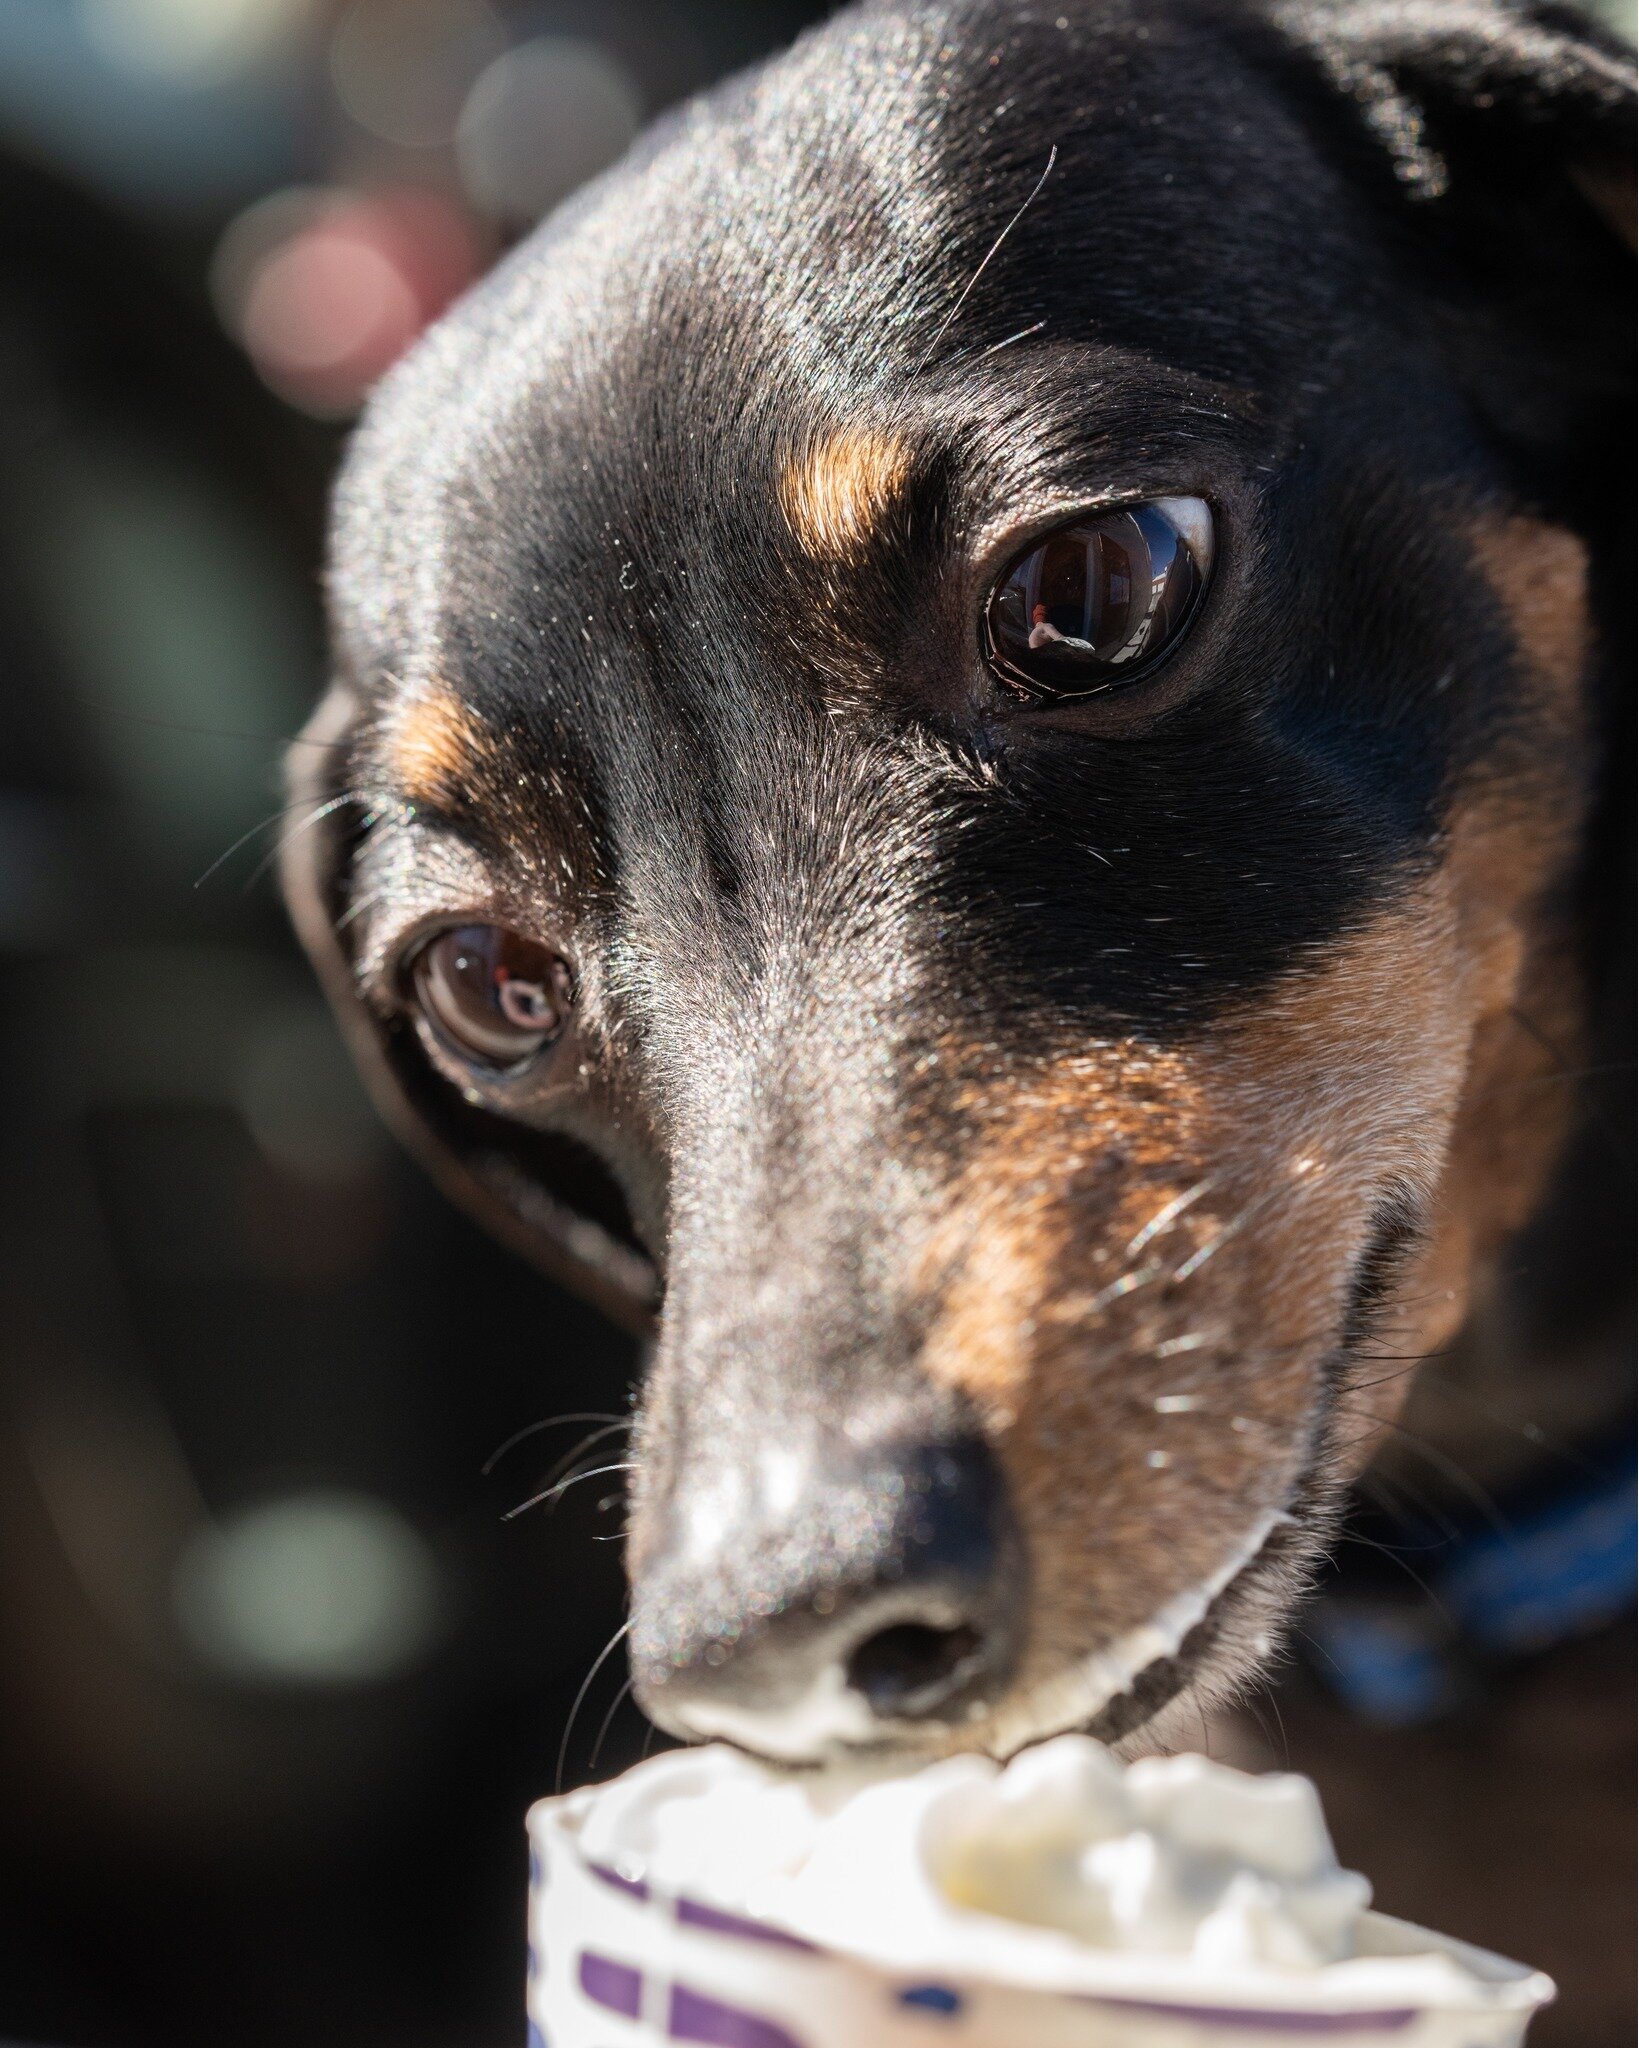 Get some... of that... pup cup?

Nothing makes our day brighter than when your pup greets us at the drive thru!

____

&bull;

&bull;

#dog #puppy #pupcup #groundedcoffeeandcrumbs #supportlocalbusiness
#crumbs #pauldingcounty #coffeeshop #coffee
#dri